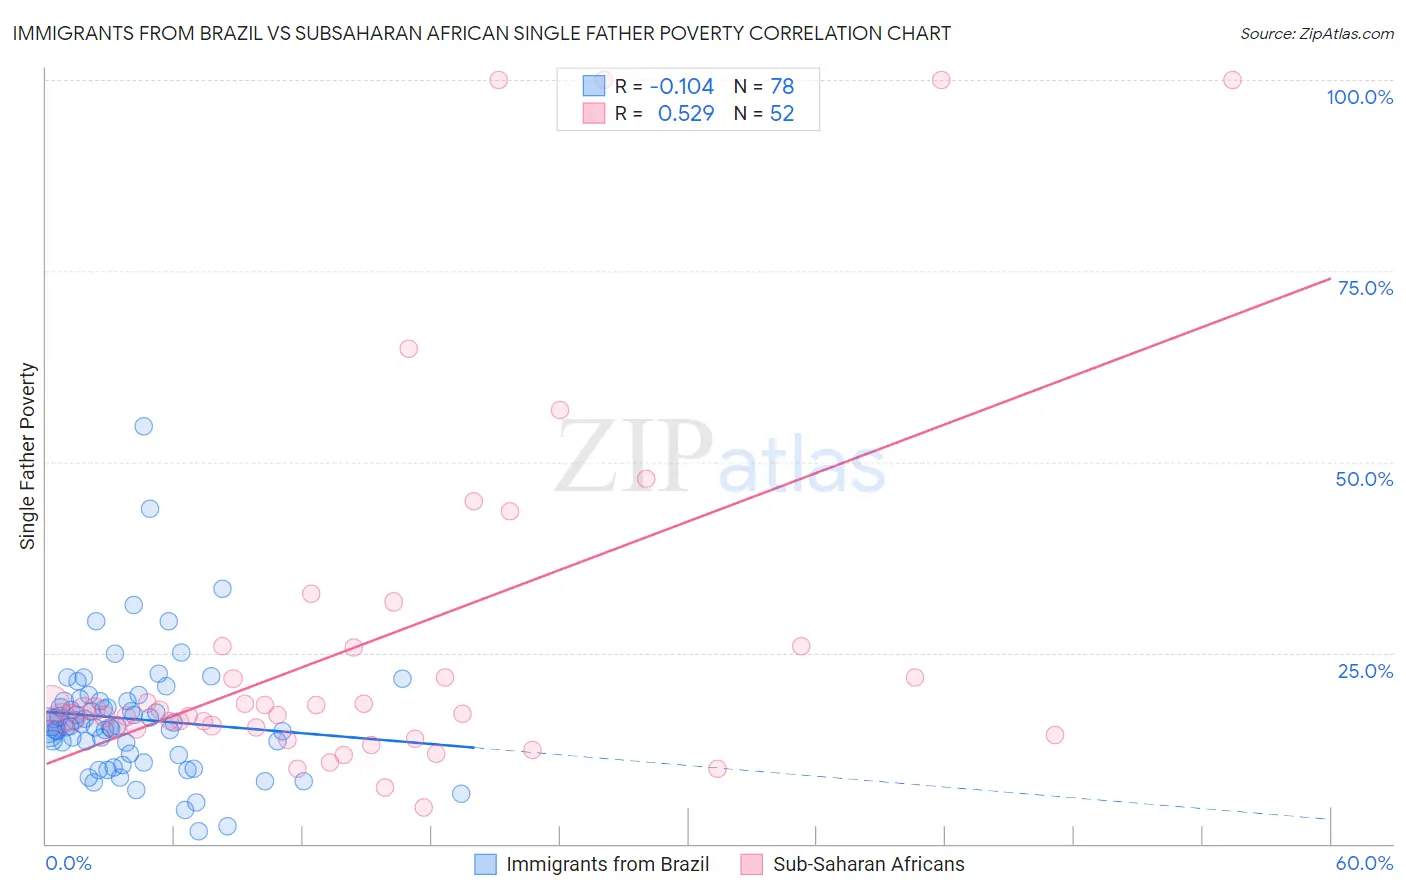 Immigrants from Brazil vs Subsaharan African Single Father Poverty